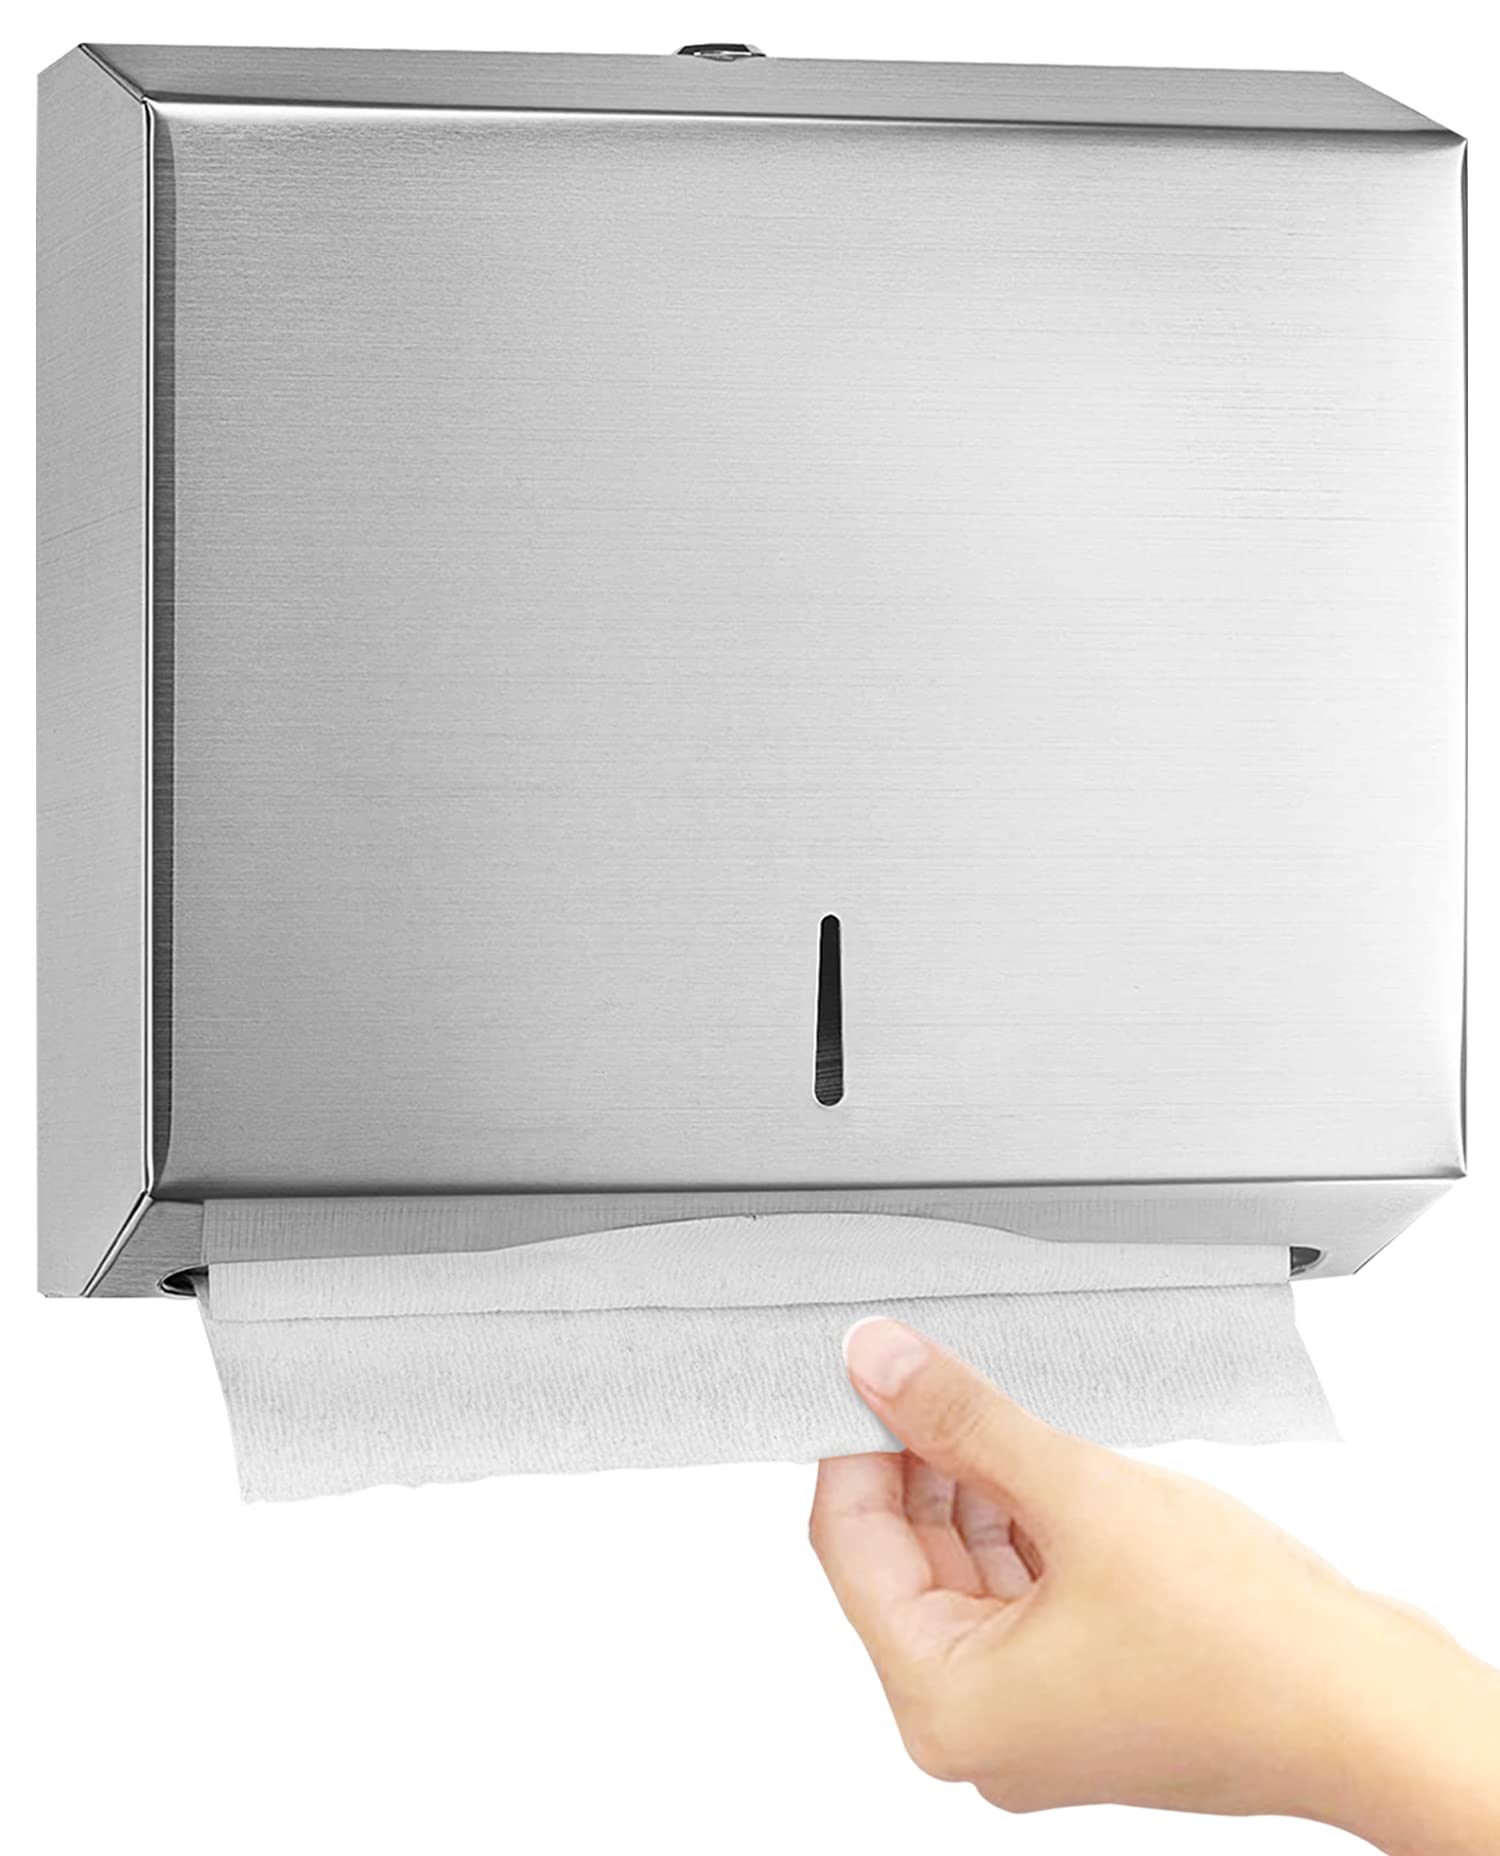 Book Cover Alpine Industries C-Fold/Multifold Paper Towel Dispenser - Brushed Stainless Steel (290 C Folds/ 380 Multi-Fold)